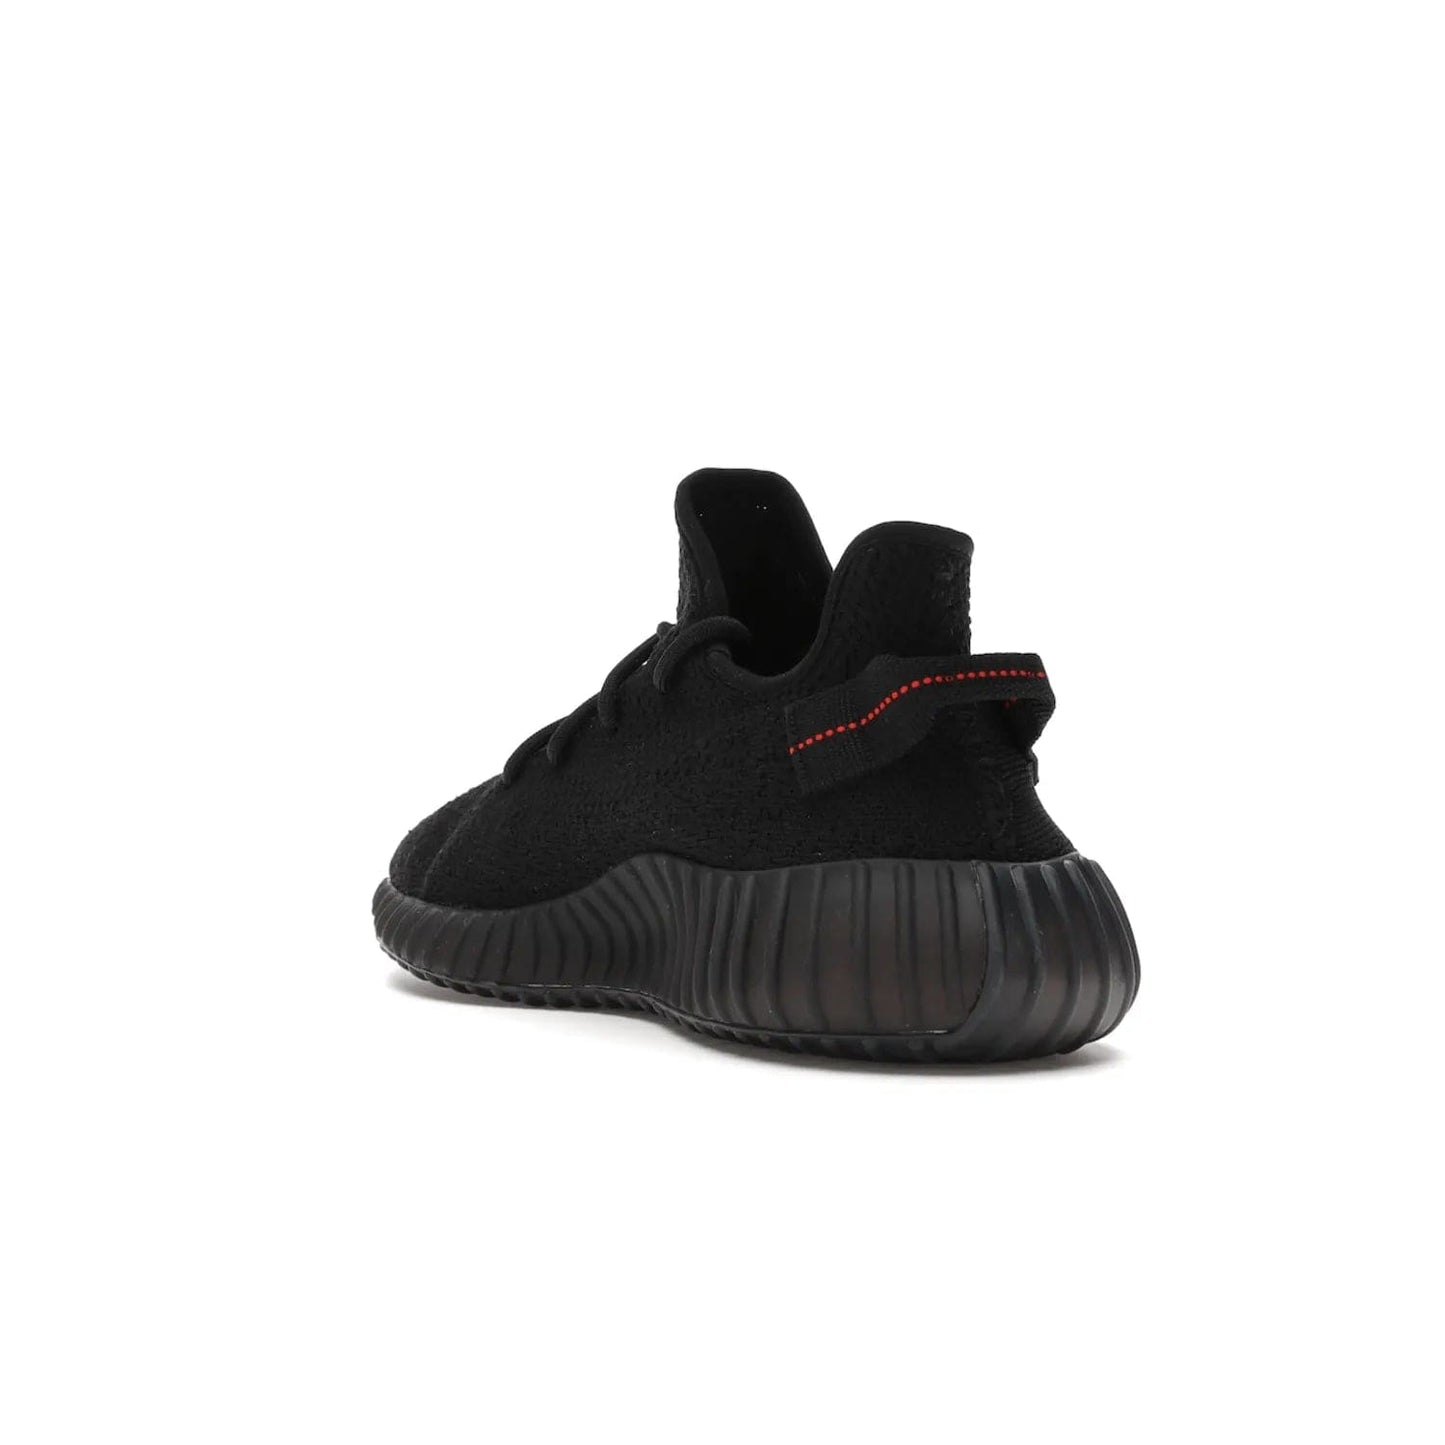 adidas Yeezy Boost 350 V2 Black Red (2017/2020) - Image 25 - Only at www.BallersClubKickz.com - Adidas Yeezy Boost 350 V2 Black Red: a classic colorway featuring black Primeknit upper, BOOST cushioning system, and iconic "SPLY-350" text. Released in 2017 for a retail price of $220.